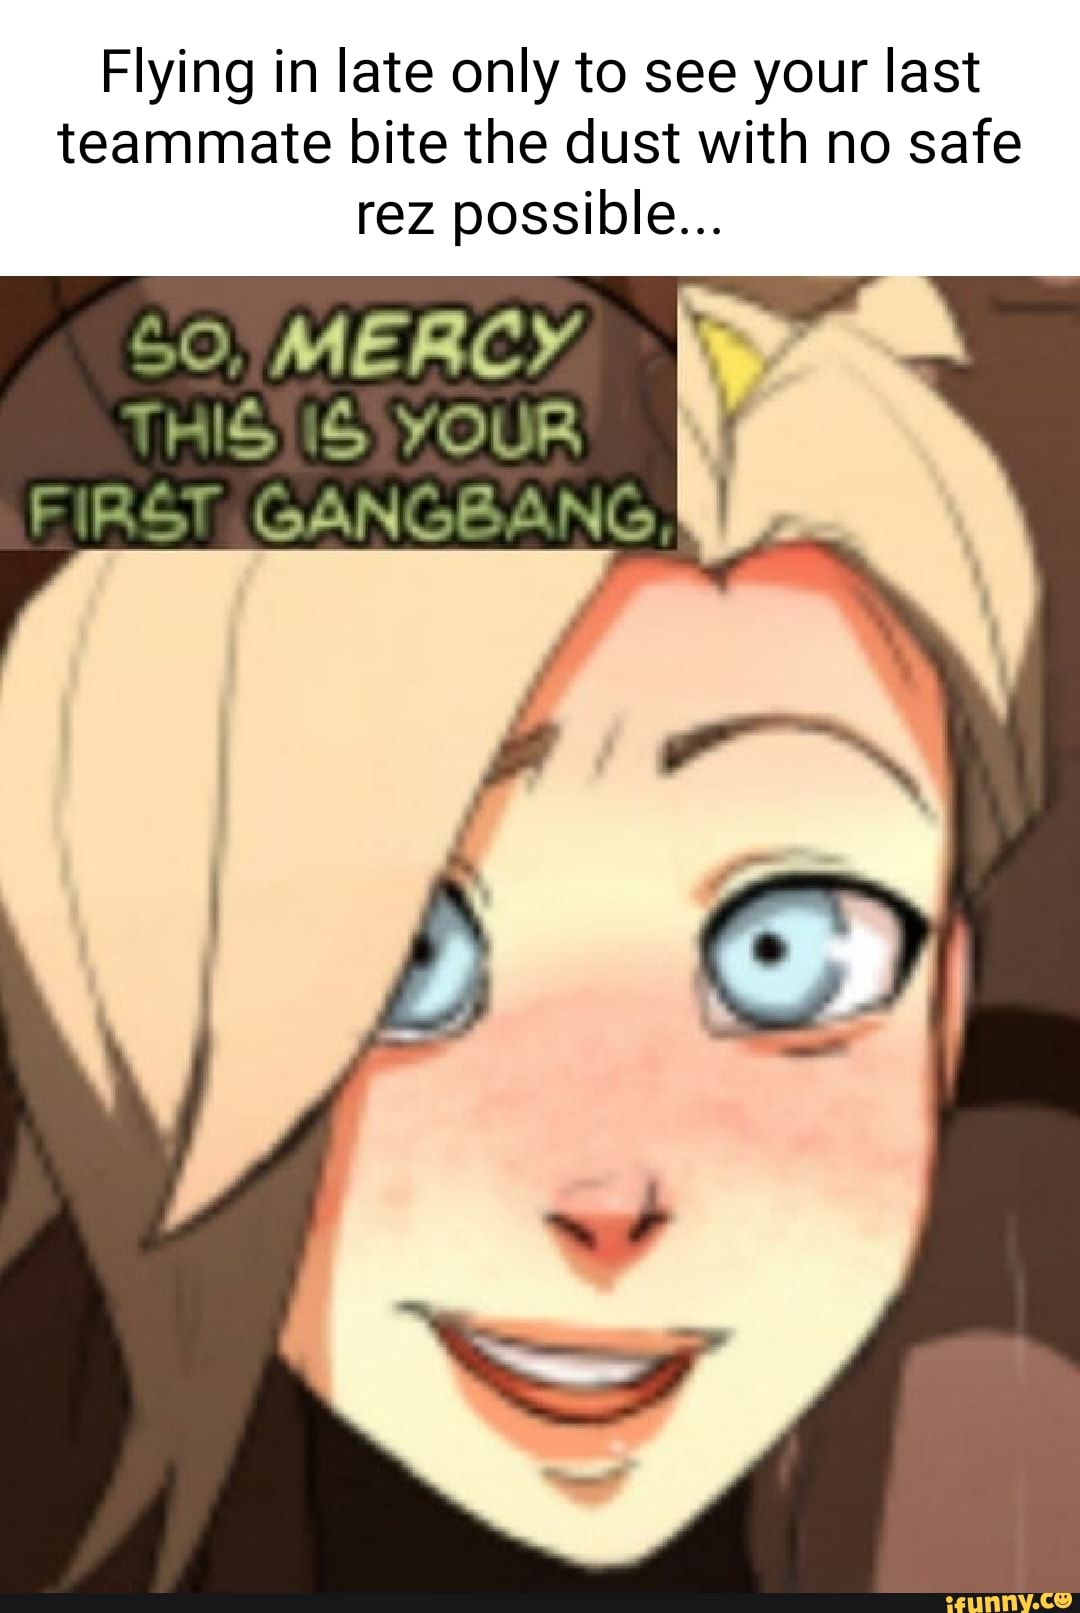 So mercy this is your first gangbang